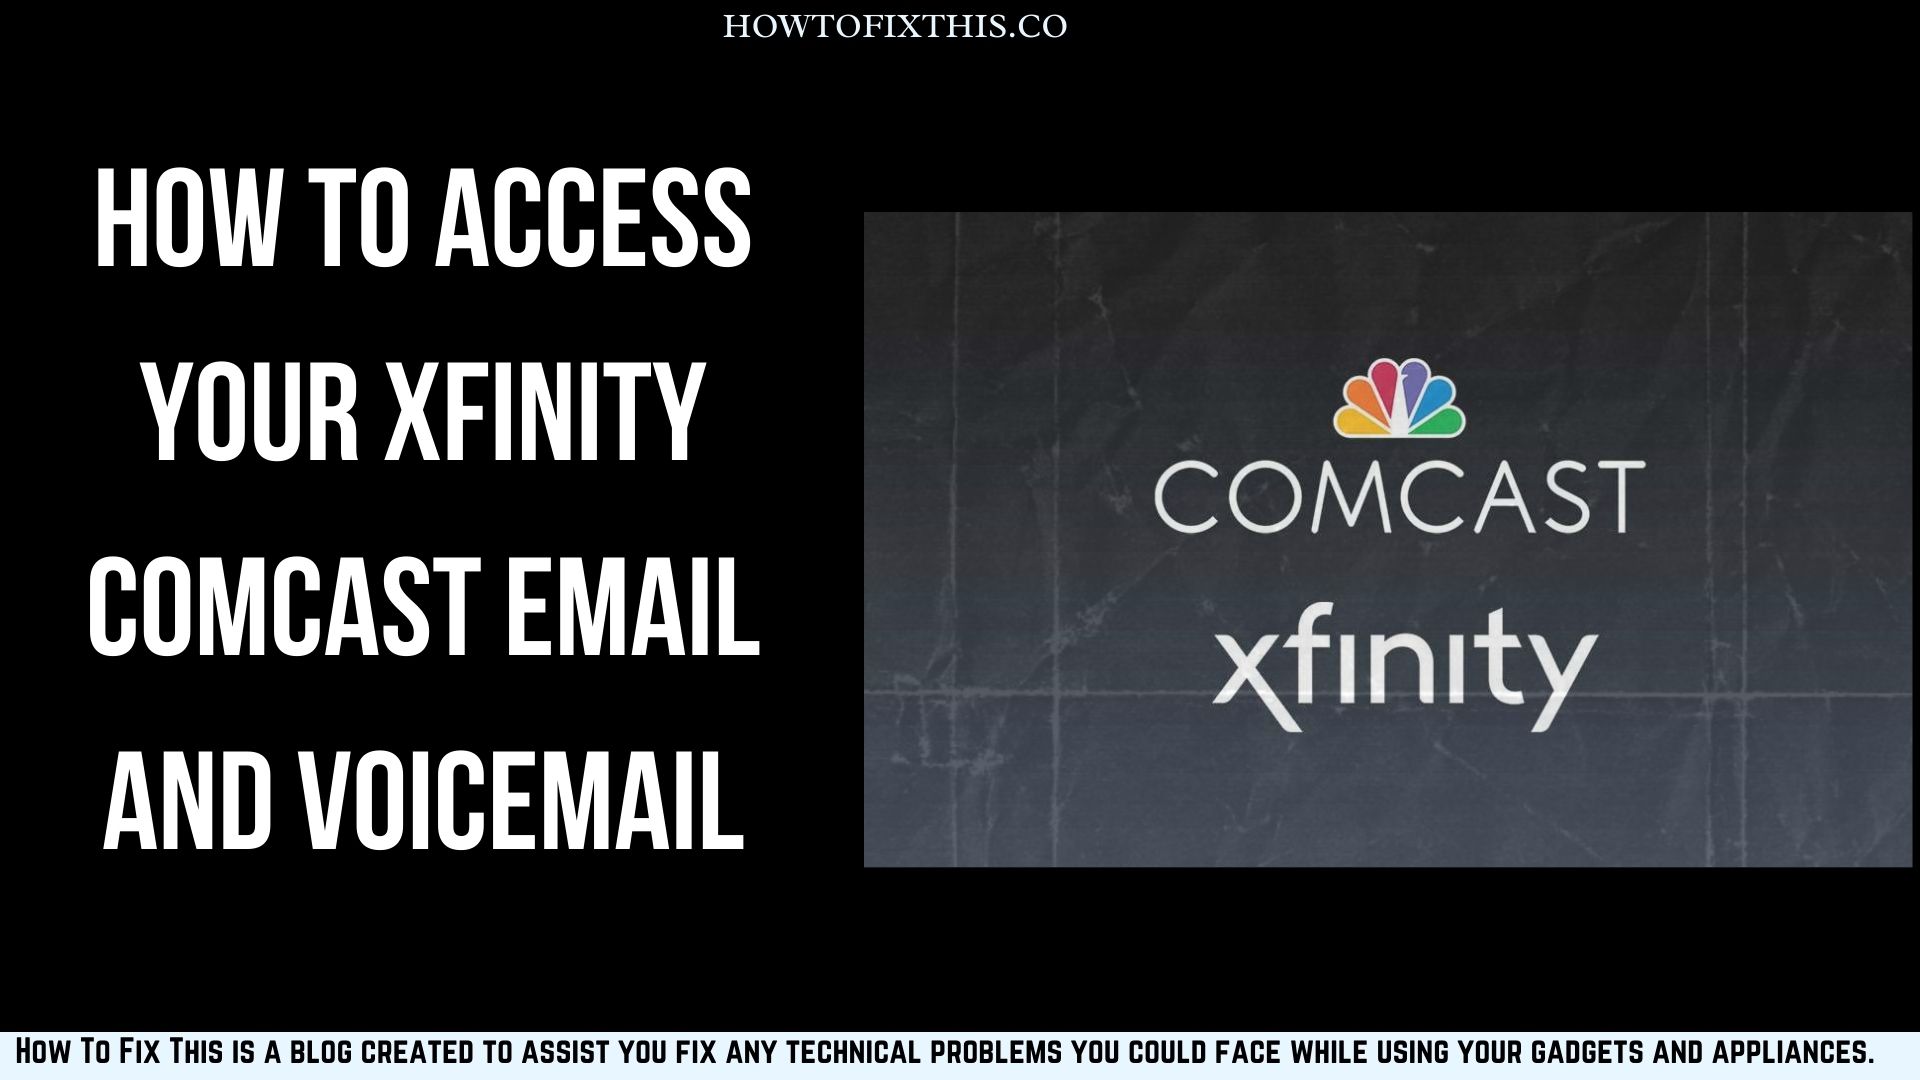 How to Access Your Xfinity Comcast Email and Voicemail